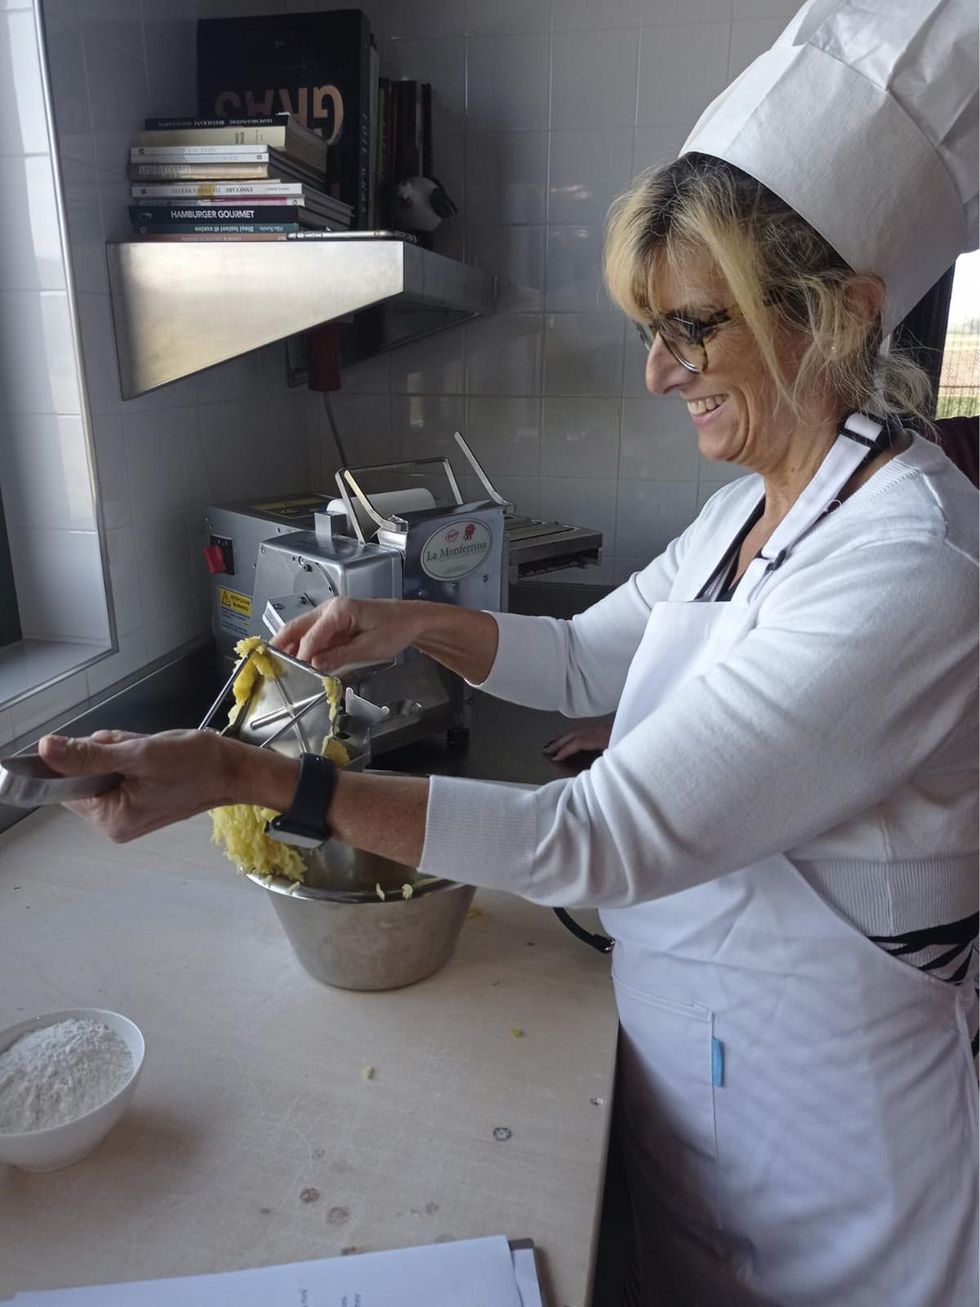 Diane Anderson-Minshall cooking in Italy